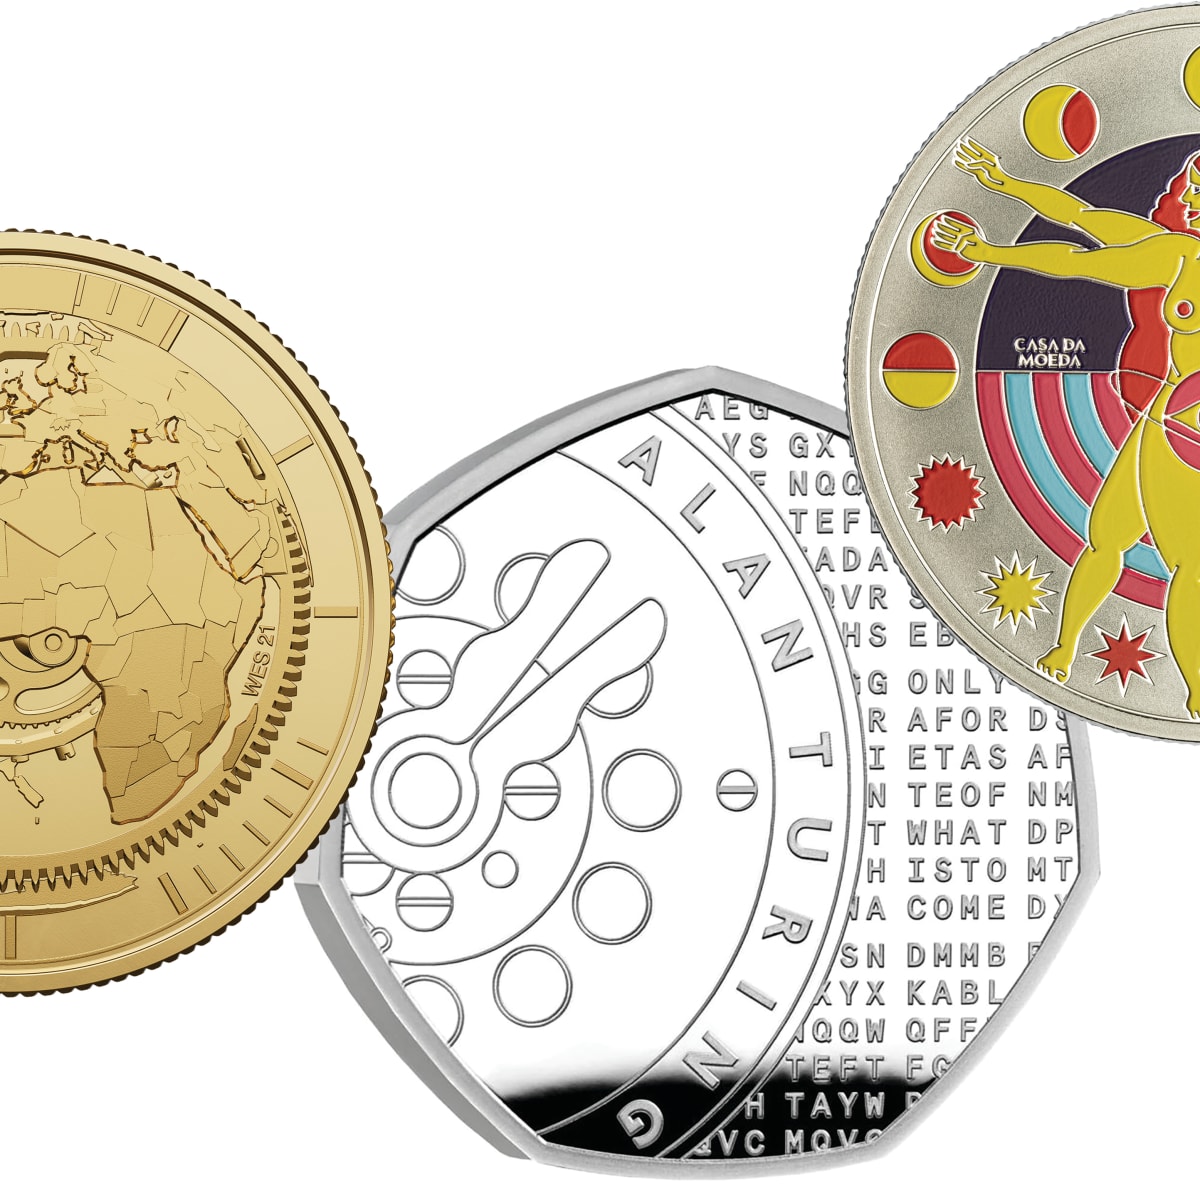 High nickel release from 1- and 2-euro coins